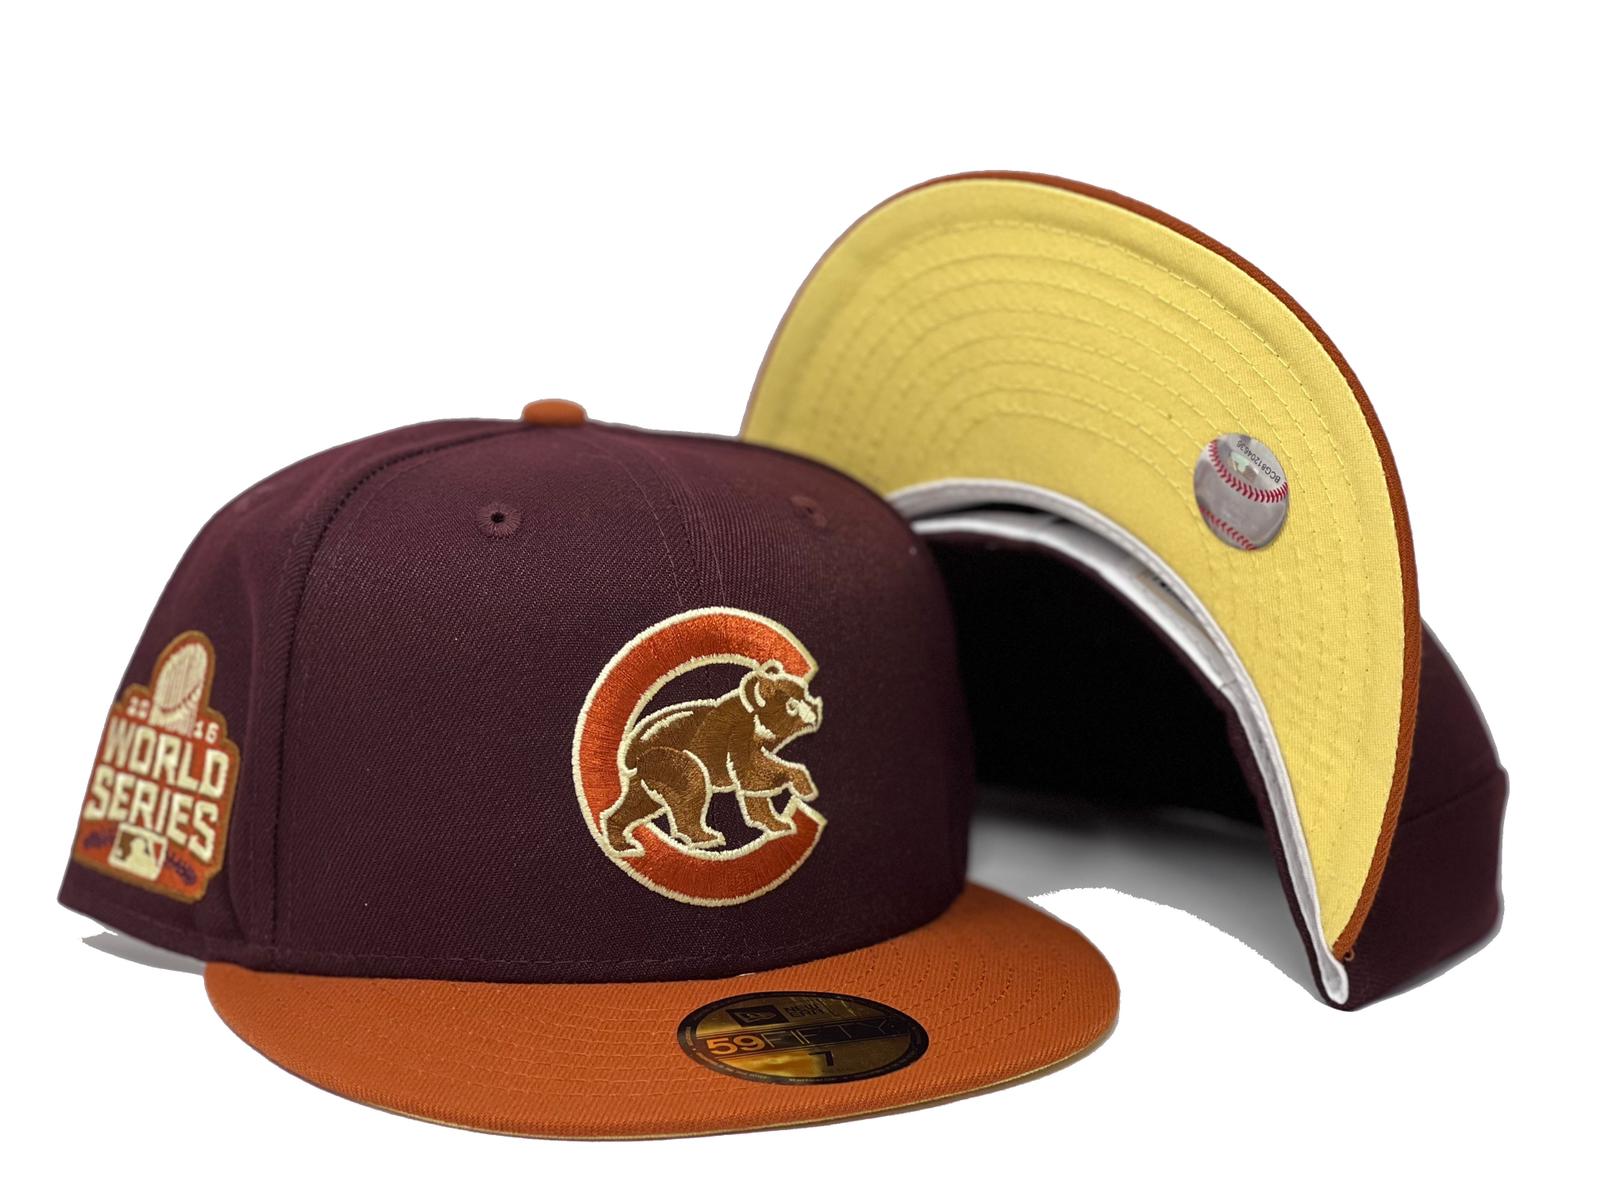 New @neweracap MLB fitted Chicago cubs 2Tone Gold and rust orange